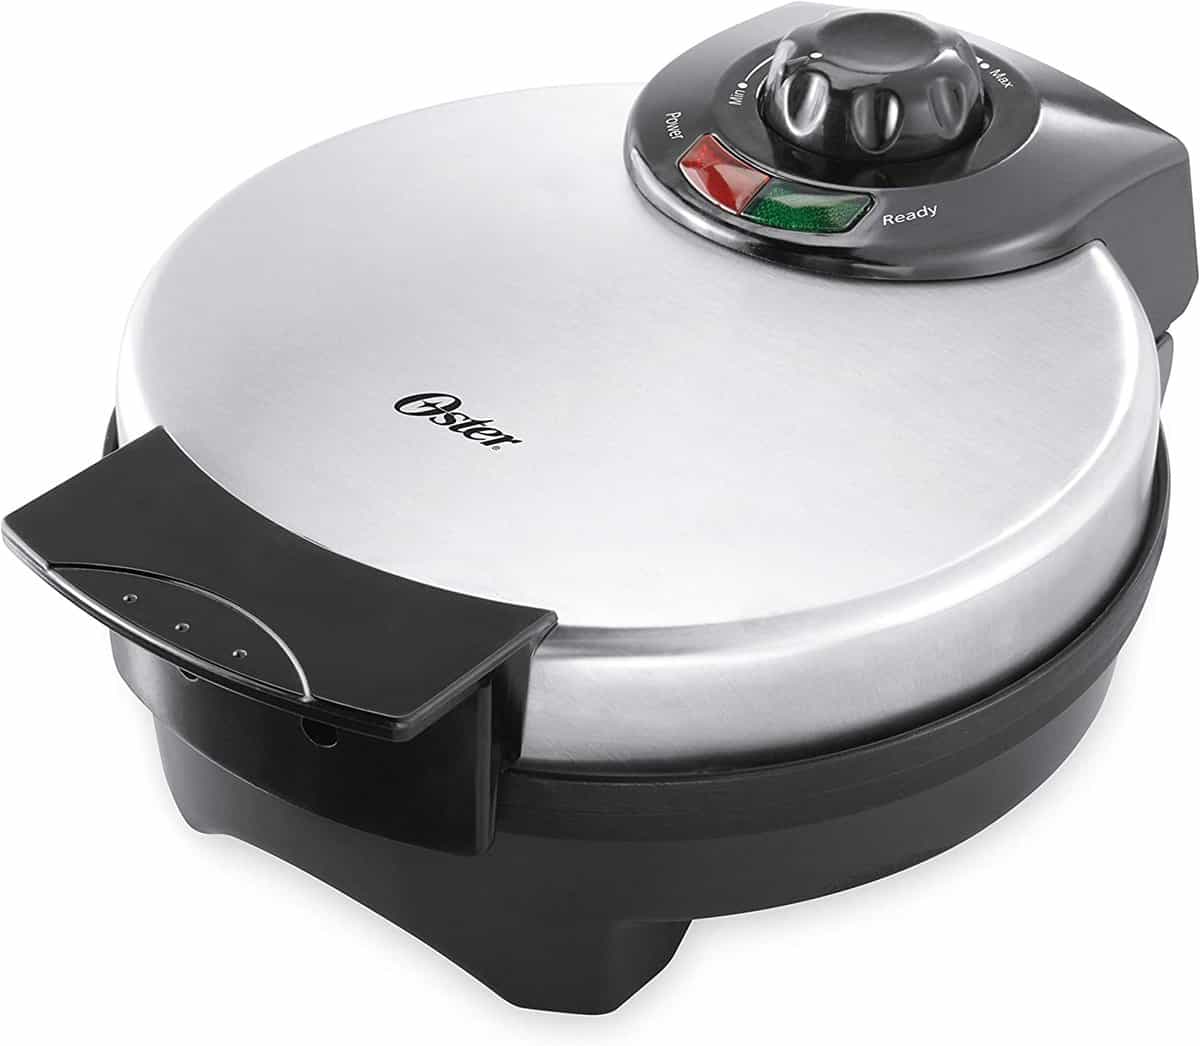 Best Reviewed Waffle Maker: Oster Belgian Waffle Maker in Stainless Steel Round